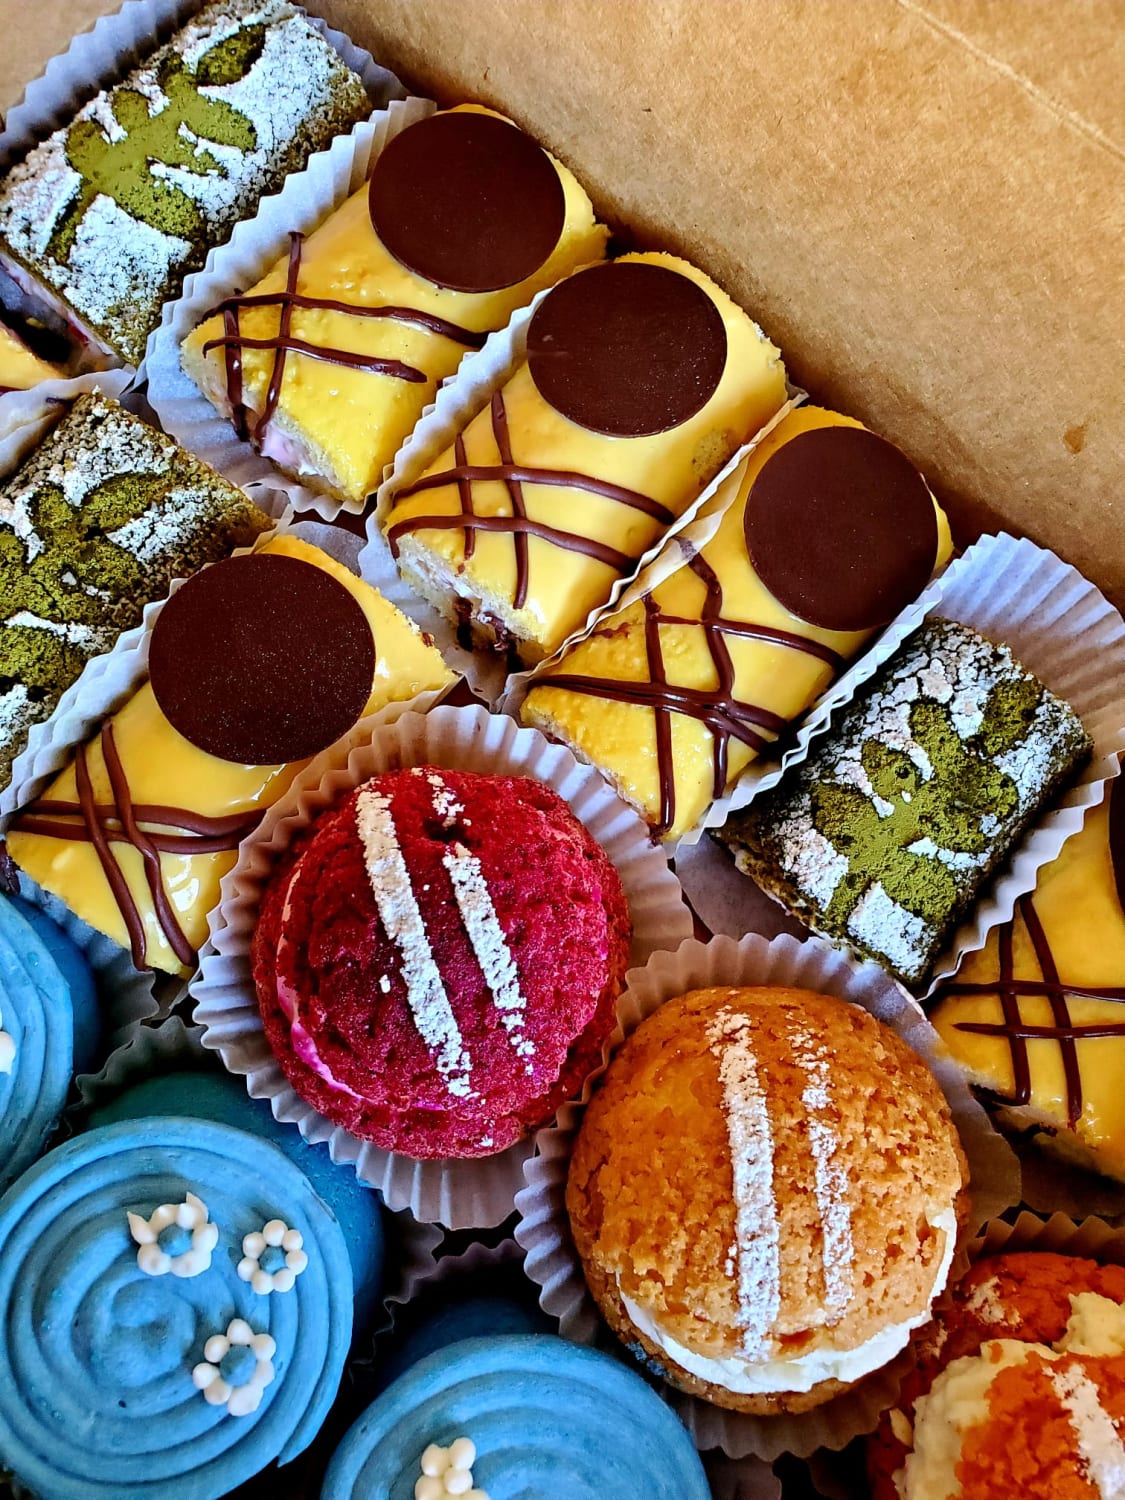 Mini Japanese roll cakes, craquelin cream puffs, and entremets